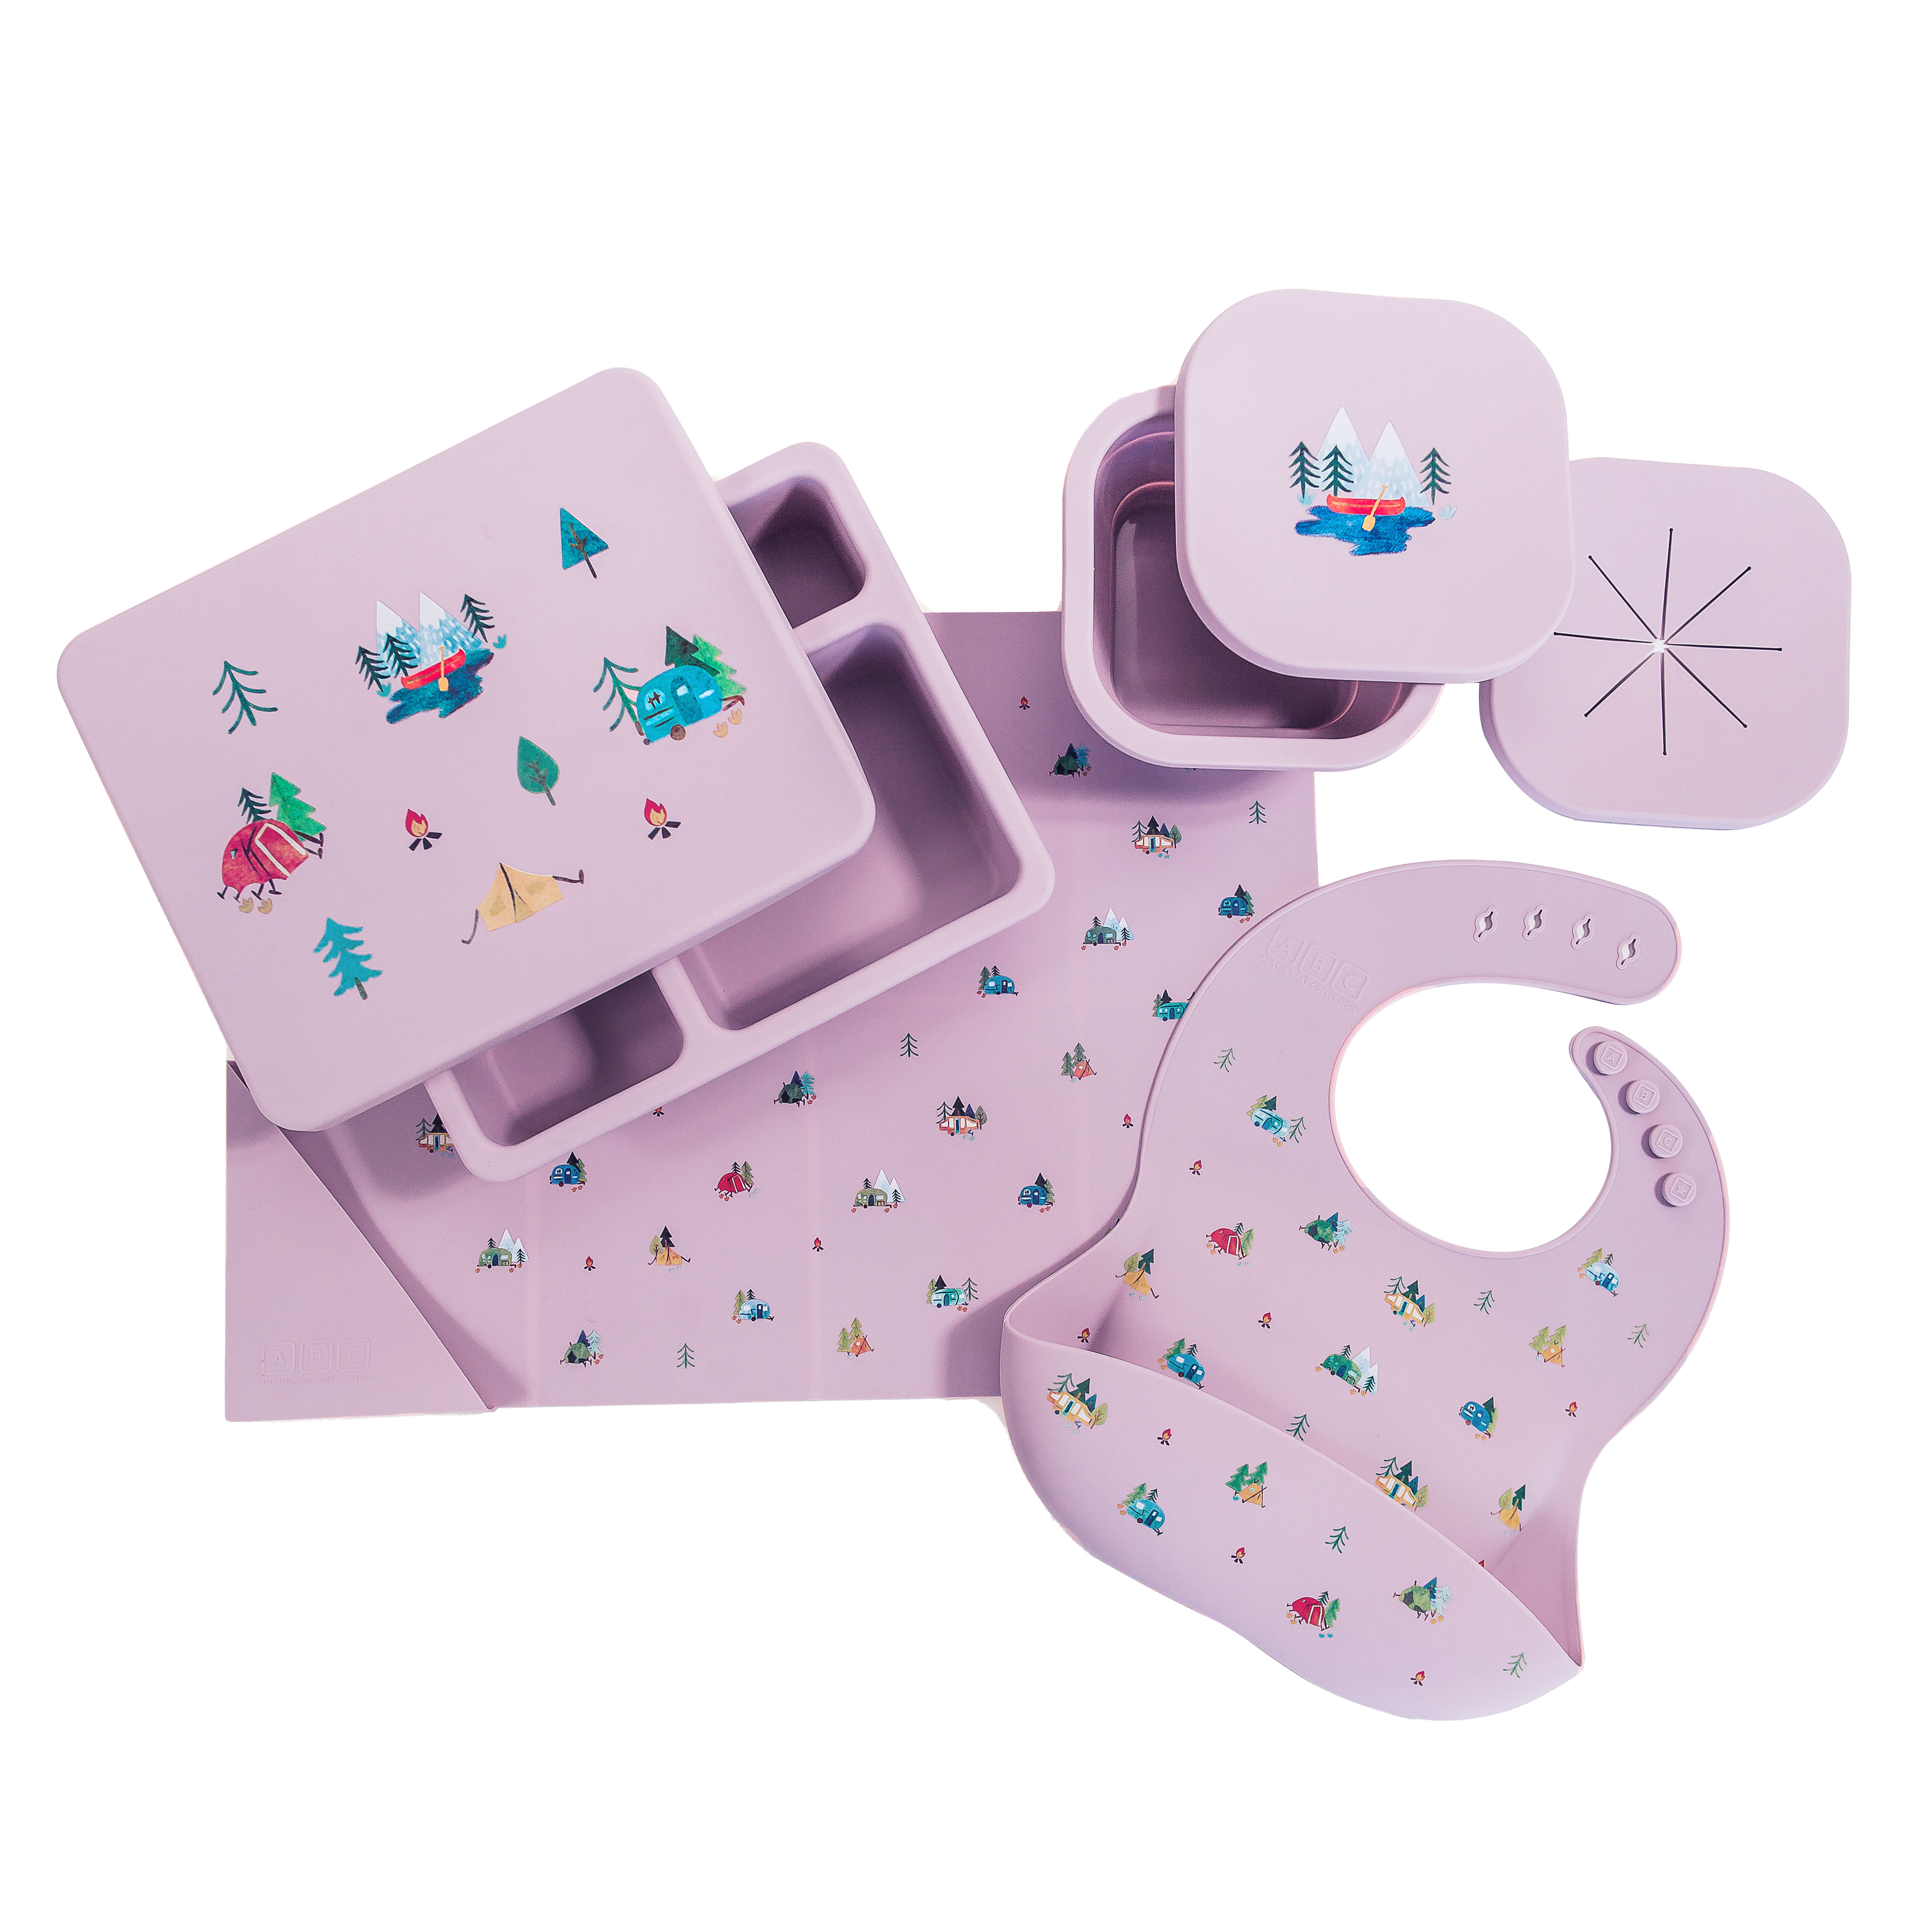 violet camping print silicone gift set with lunch bento box, snack bowl, feeding bib, and placemat